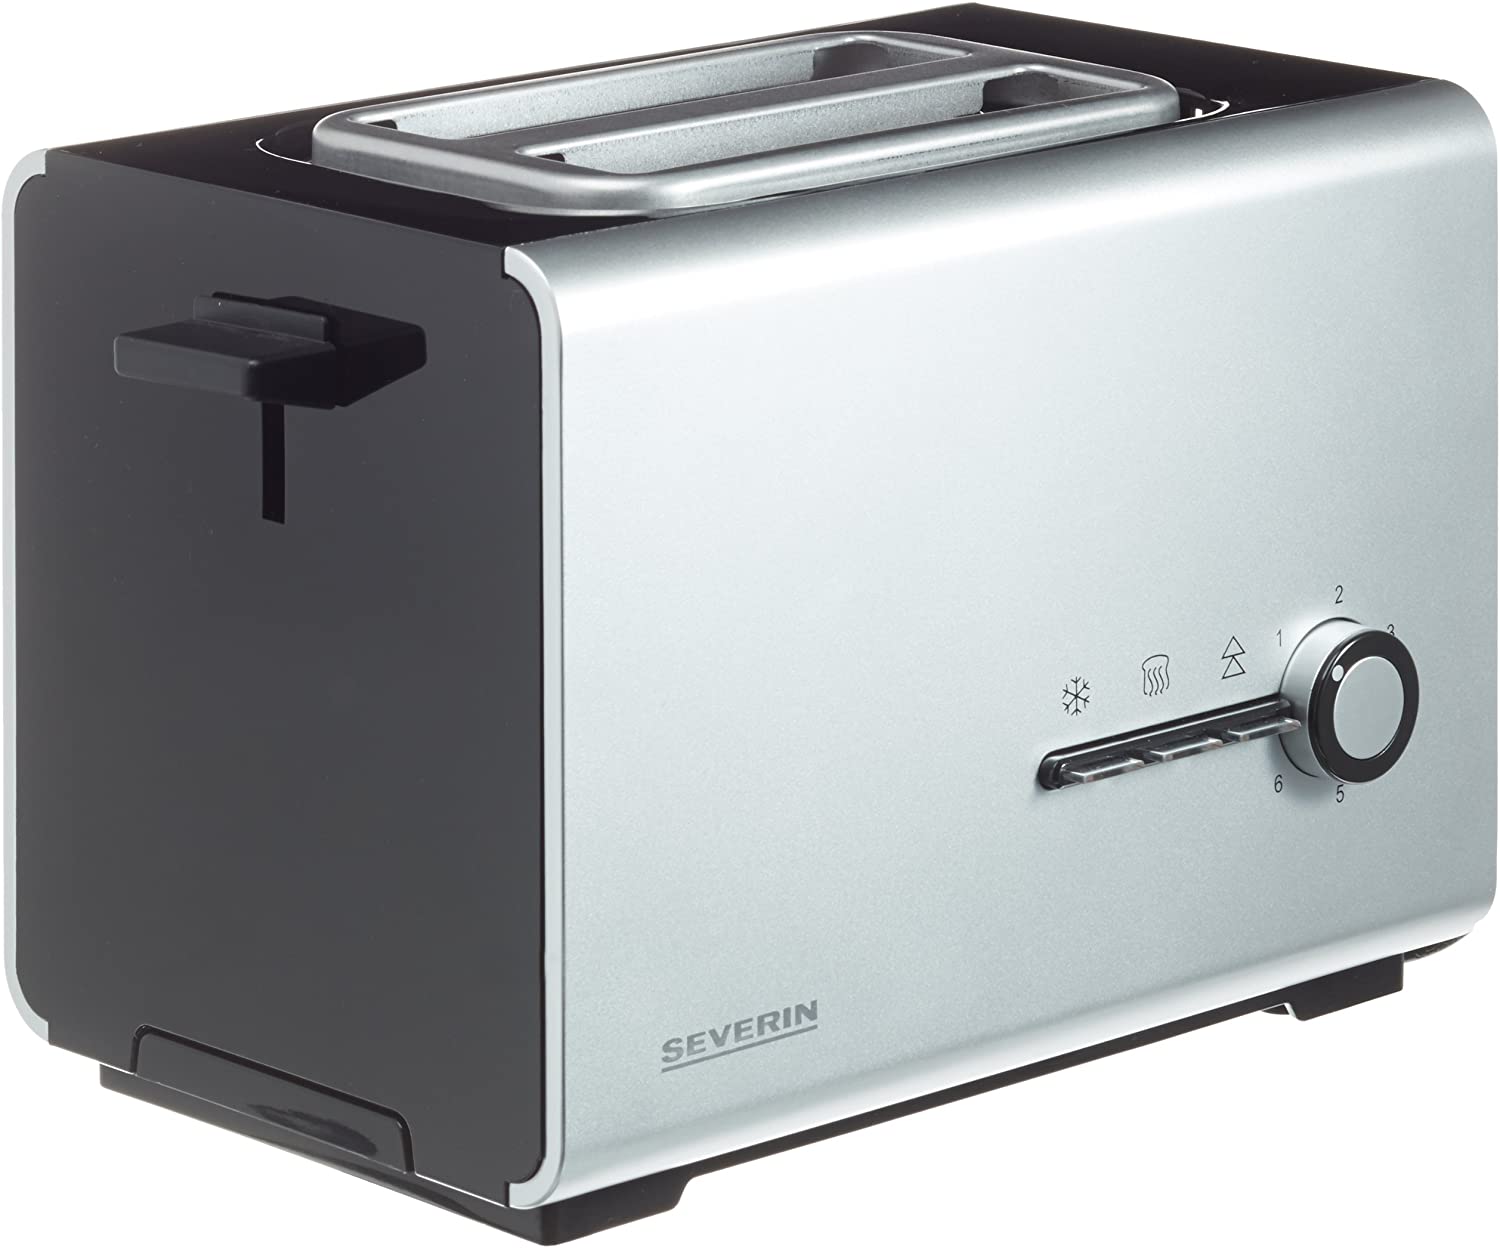 Severin AT 2519 Automatic Toaster 900 W – Silver/Black